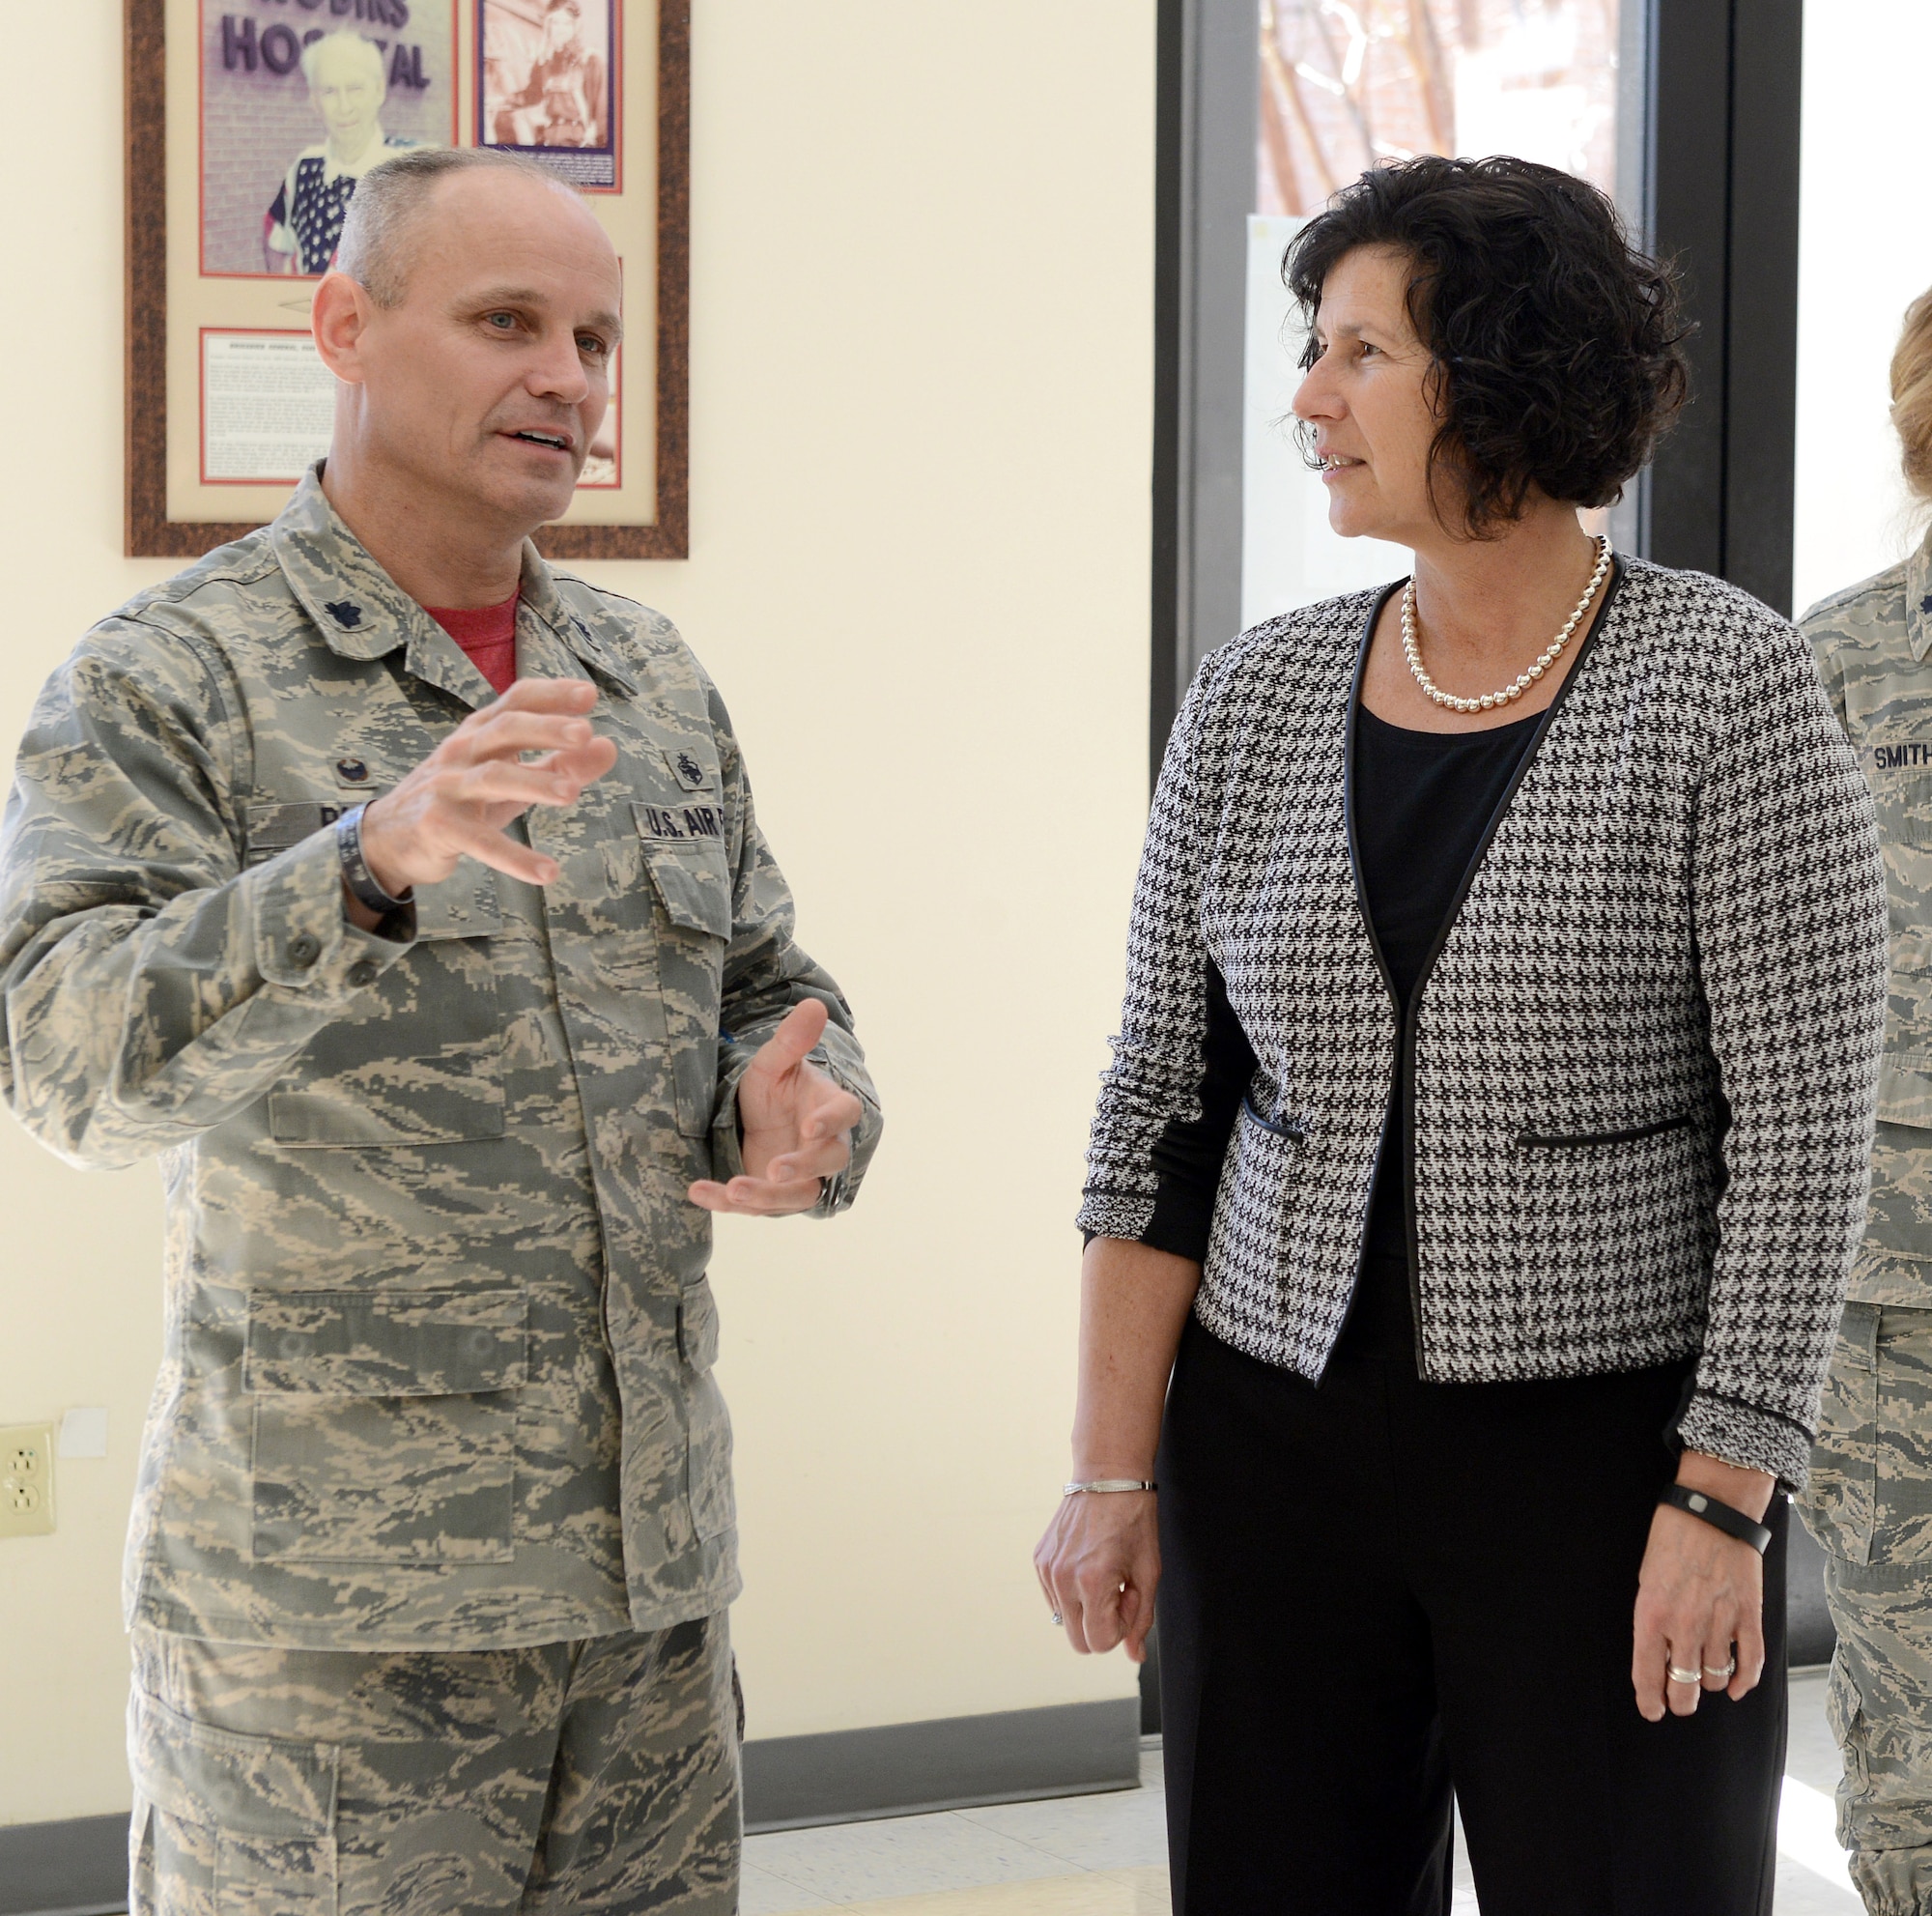 Lt. Col. Richard Palmer, 78th Medical Support Squadron commander, provides Maryalice Morro, Carl Vinson VA Medical Center director, with a tour of the 78th Medical Group’s facility Feb. 5. The 78th MDG is using its ties with community health care partners to come up with ways to share training opportunities. (U.S. Air Force photo by Tommie Horton)
